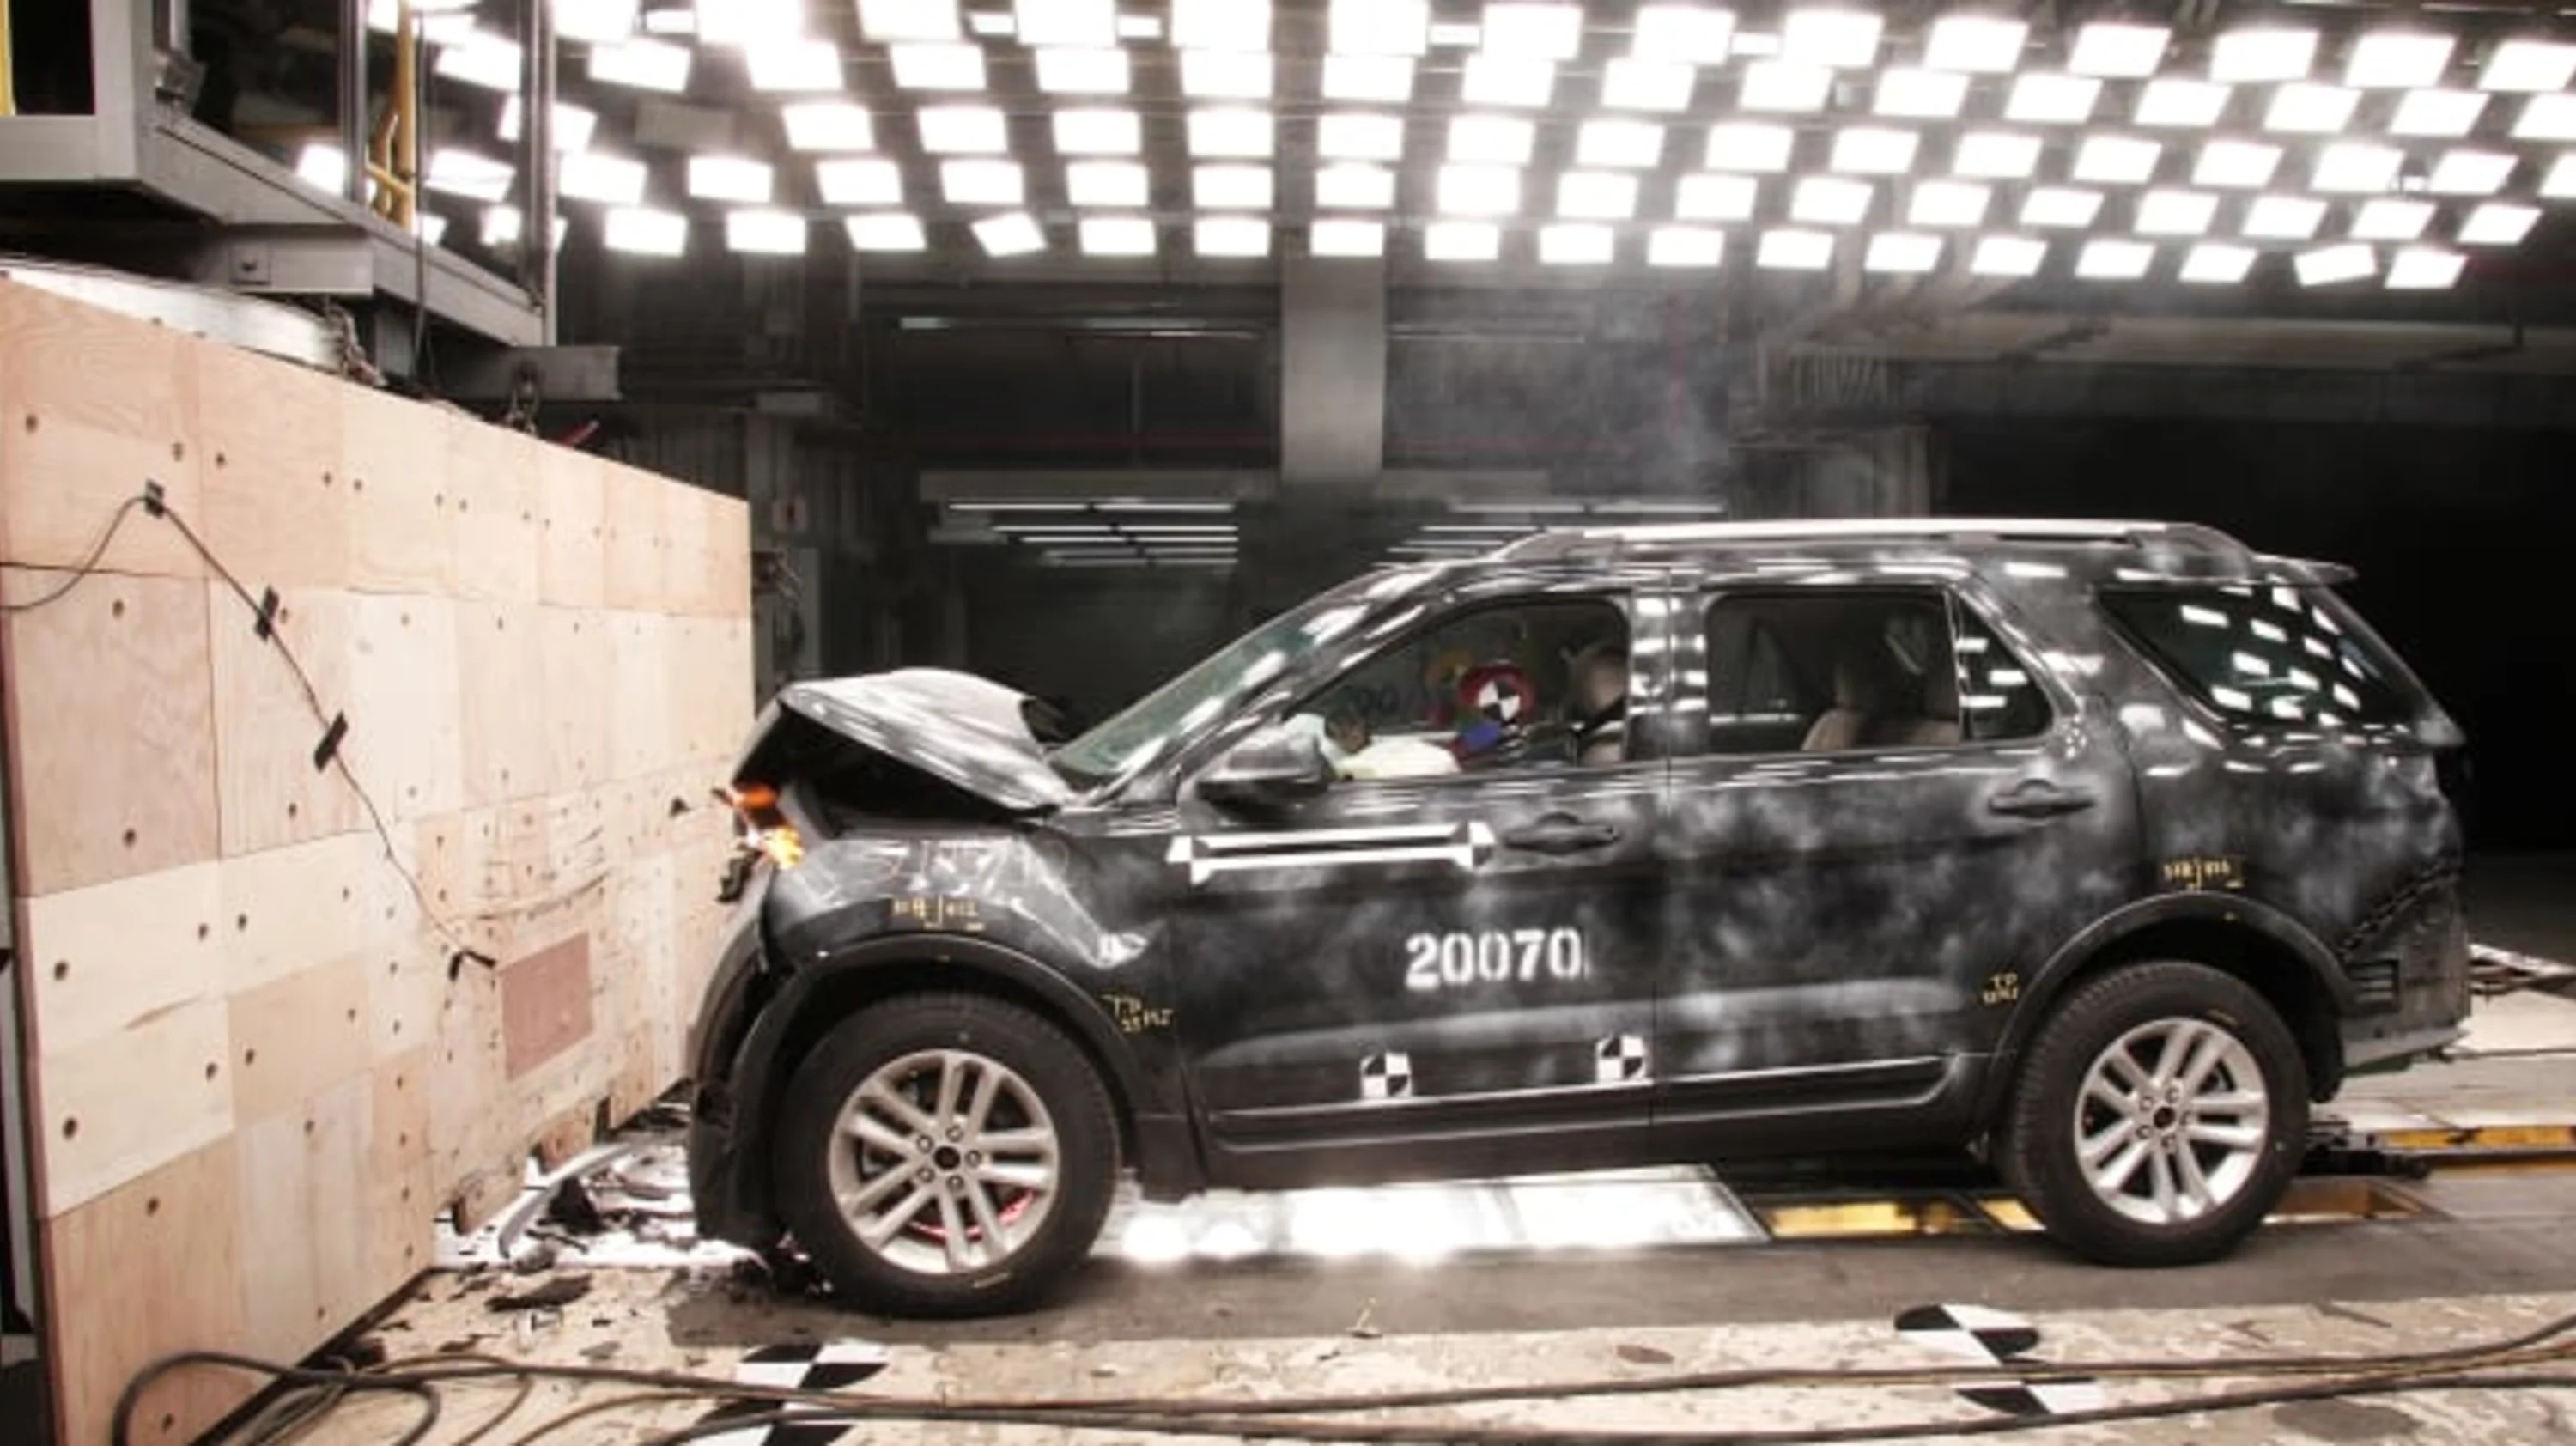 Ford Demonstrates Its Latest Crash Test Technology